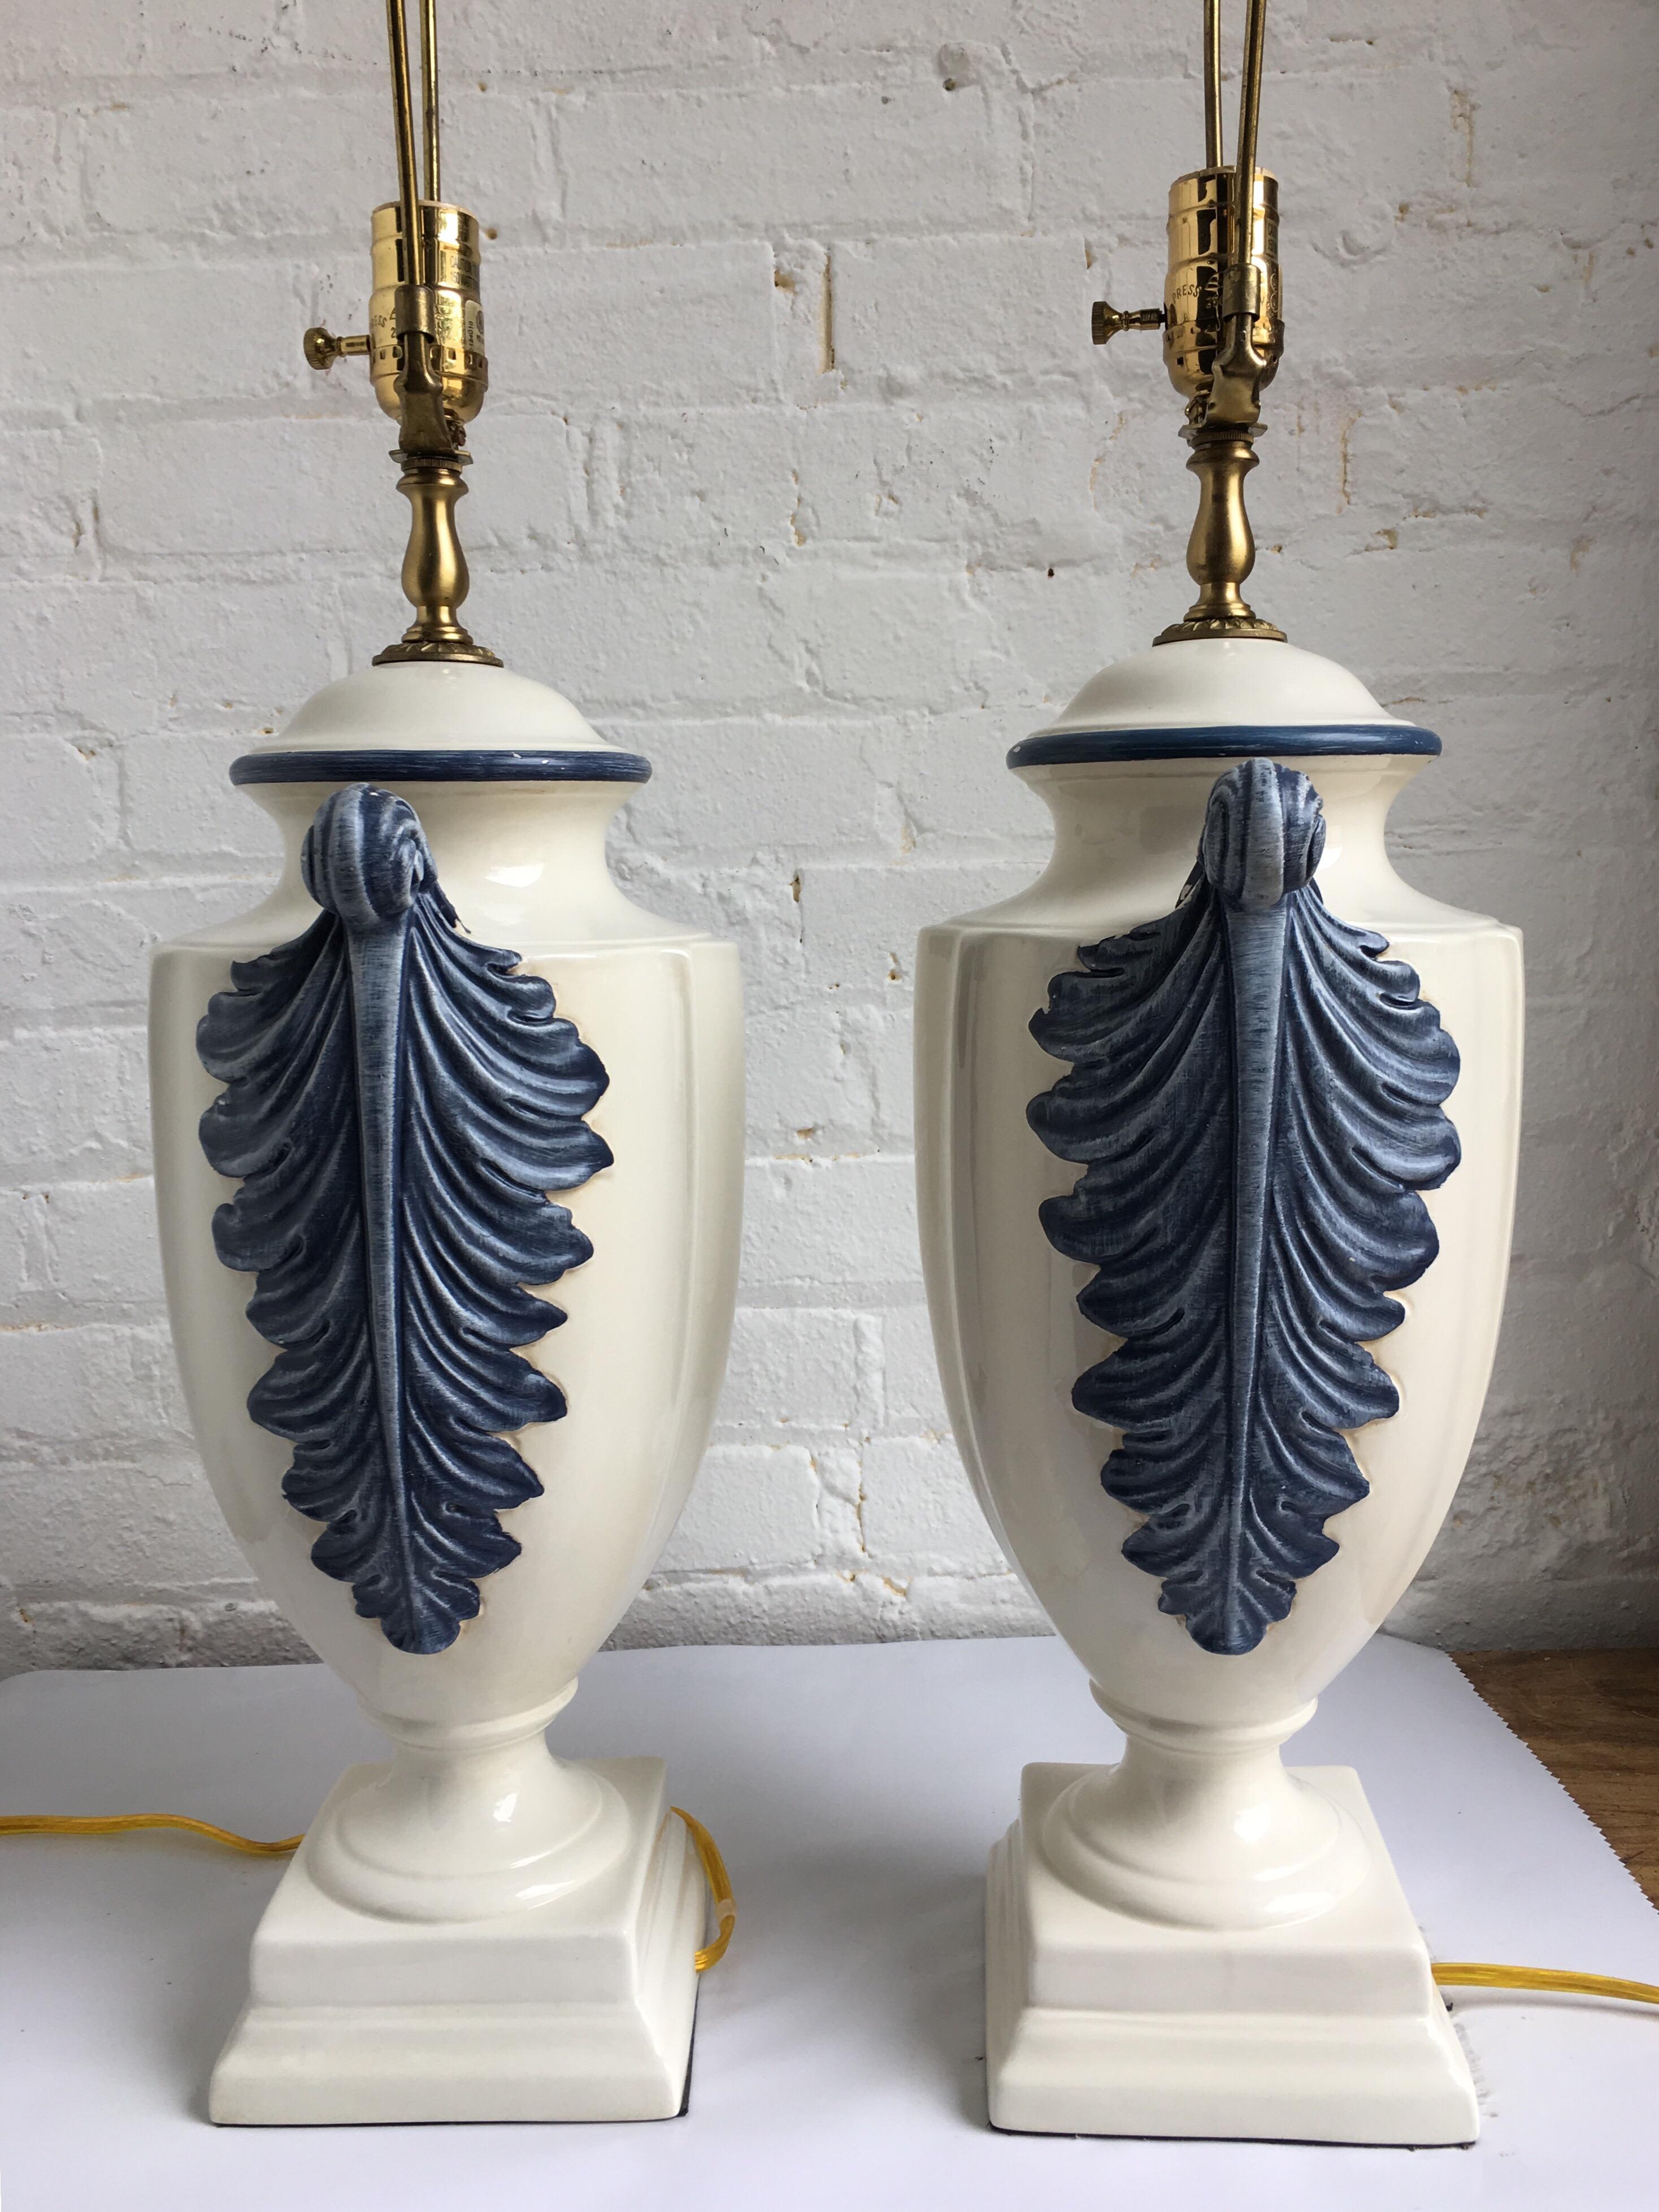 Pair of Hollywood Regency style blue and white porcelain glazed urn table lamps on plinth bases. Side handles feature dimensional hand painted plume or feather decorations. Lamp shades not included. 

Measures: 31.5 inches high to harp.
22.5 inches